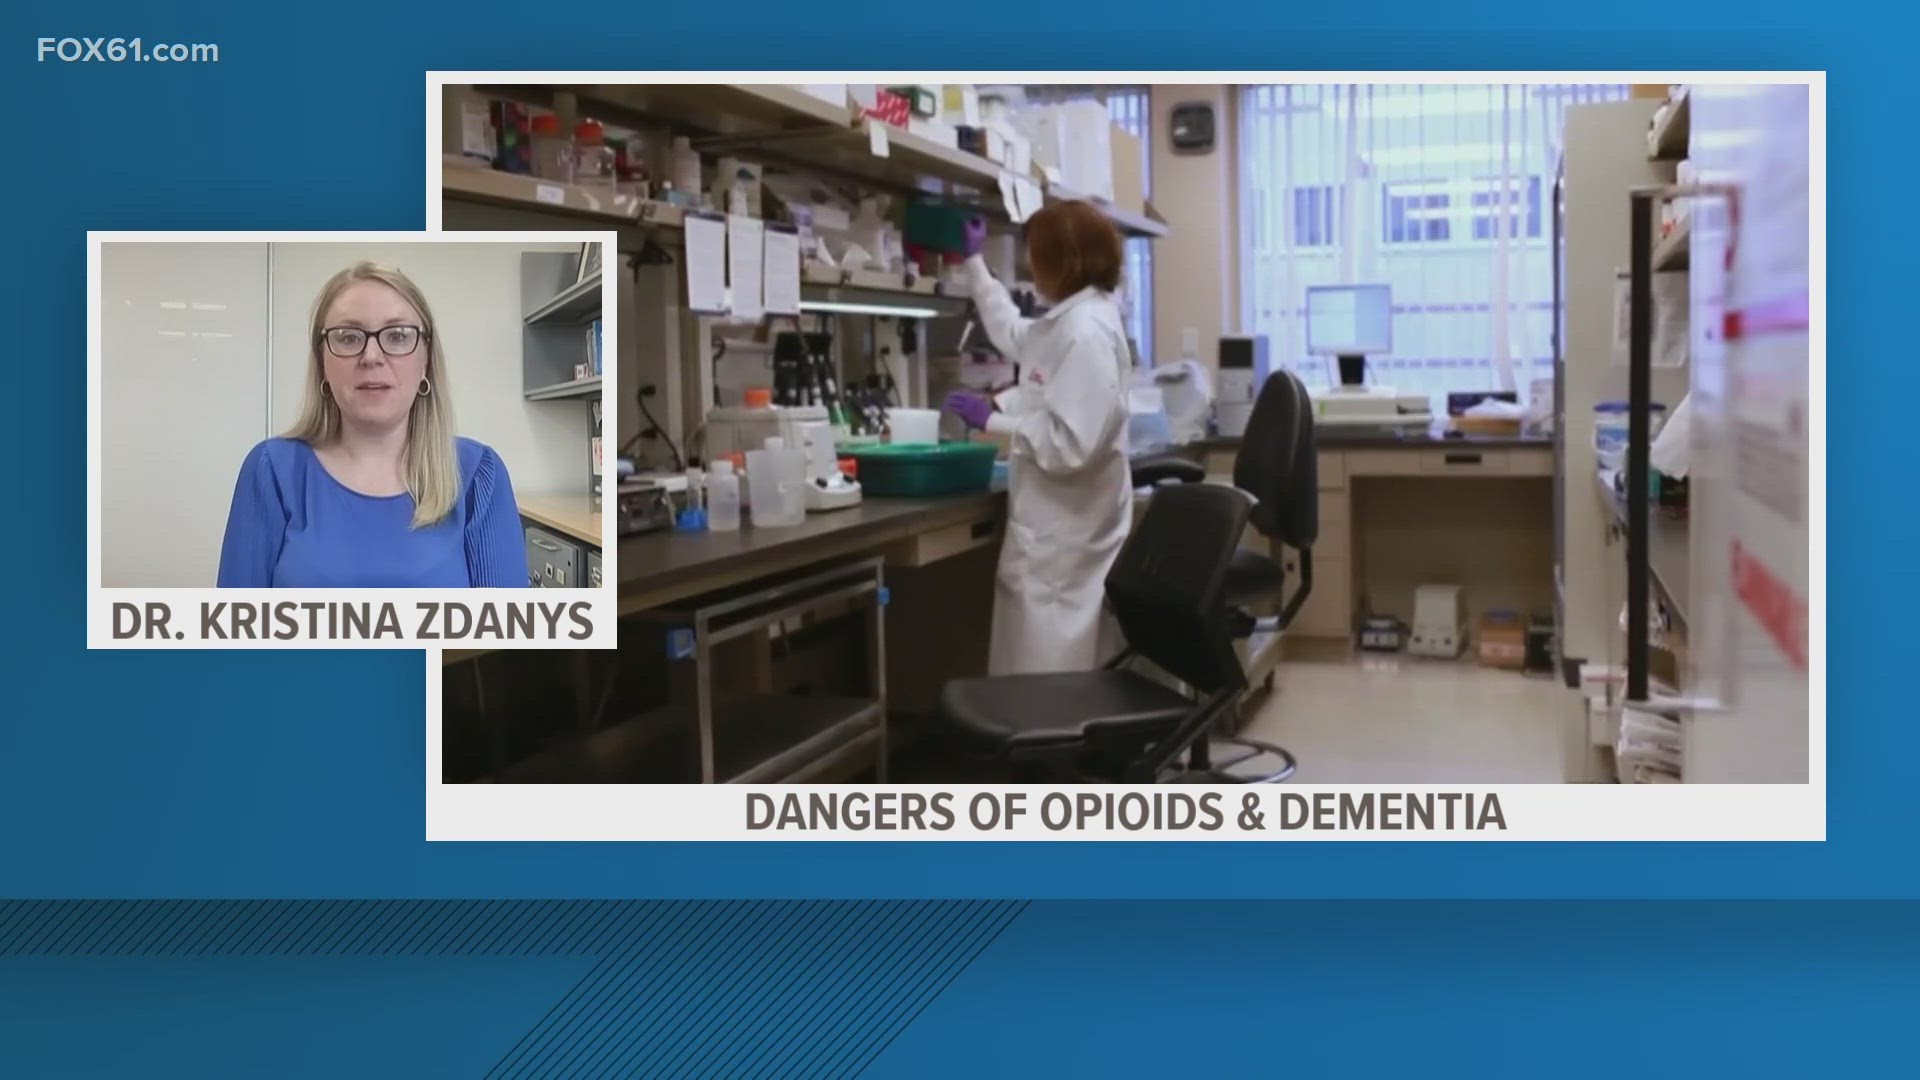 Dr. Kristina Zdanys, a Geriatric Psychiatrist at UConn Health, explains why older adults starting opioids after dementia diagnosis is extremely risky.